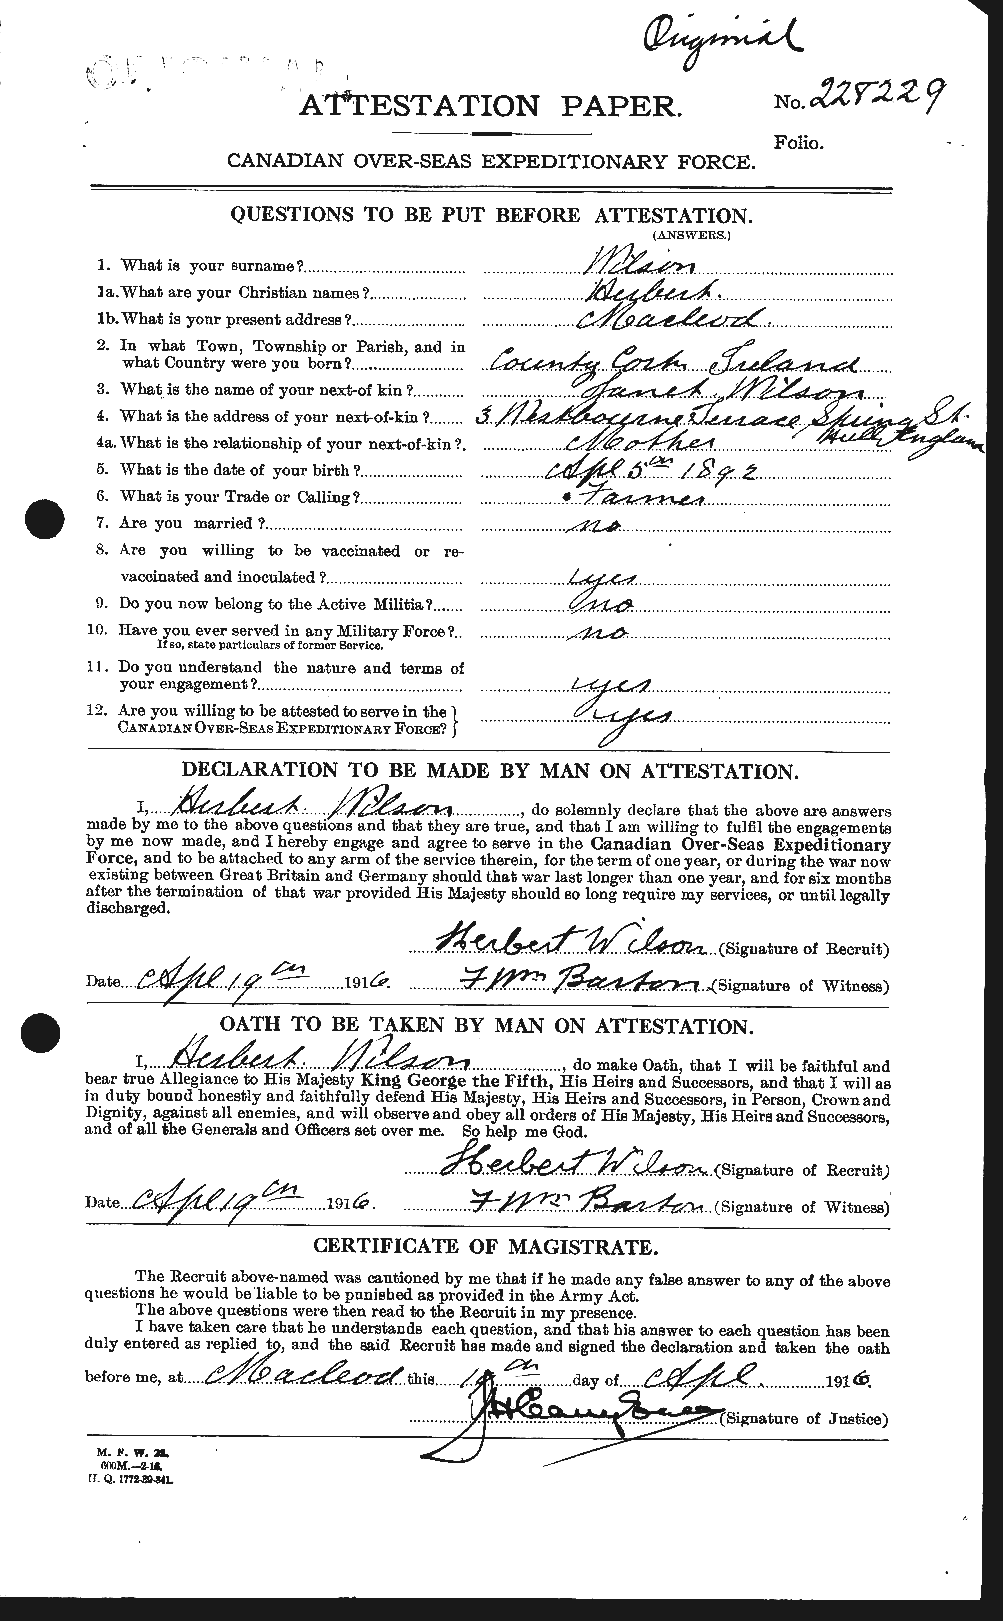 Personnel Records of the First World War - CEF 679548a